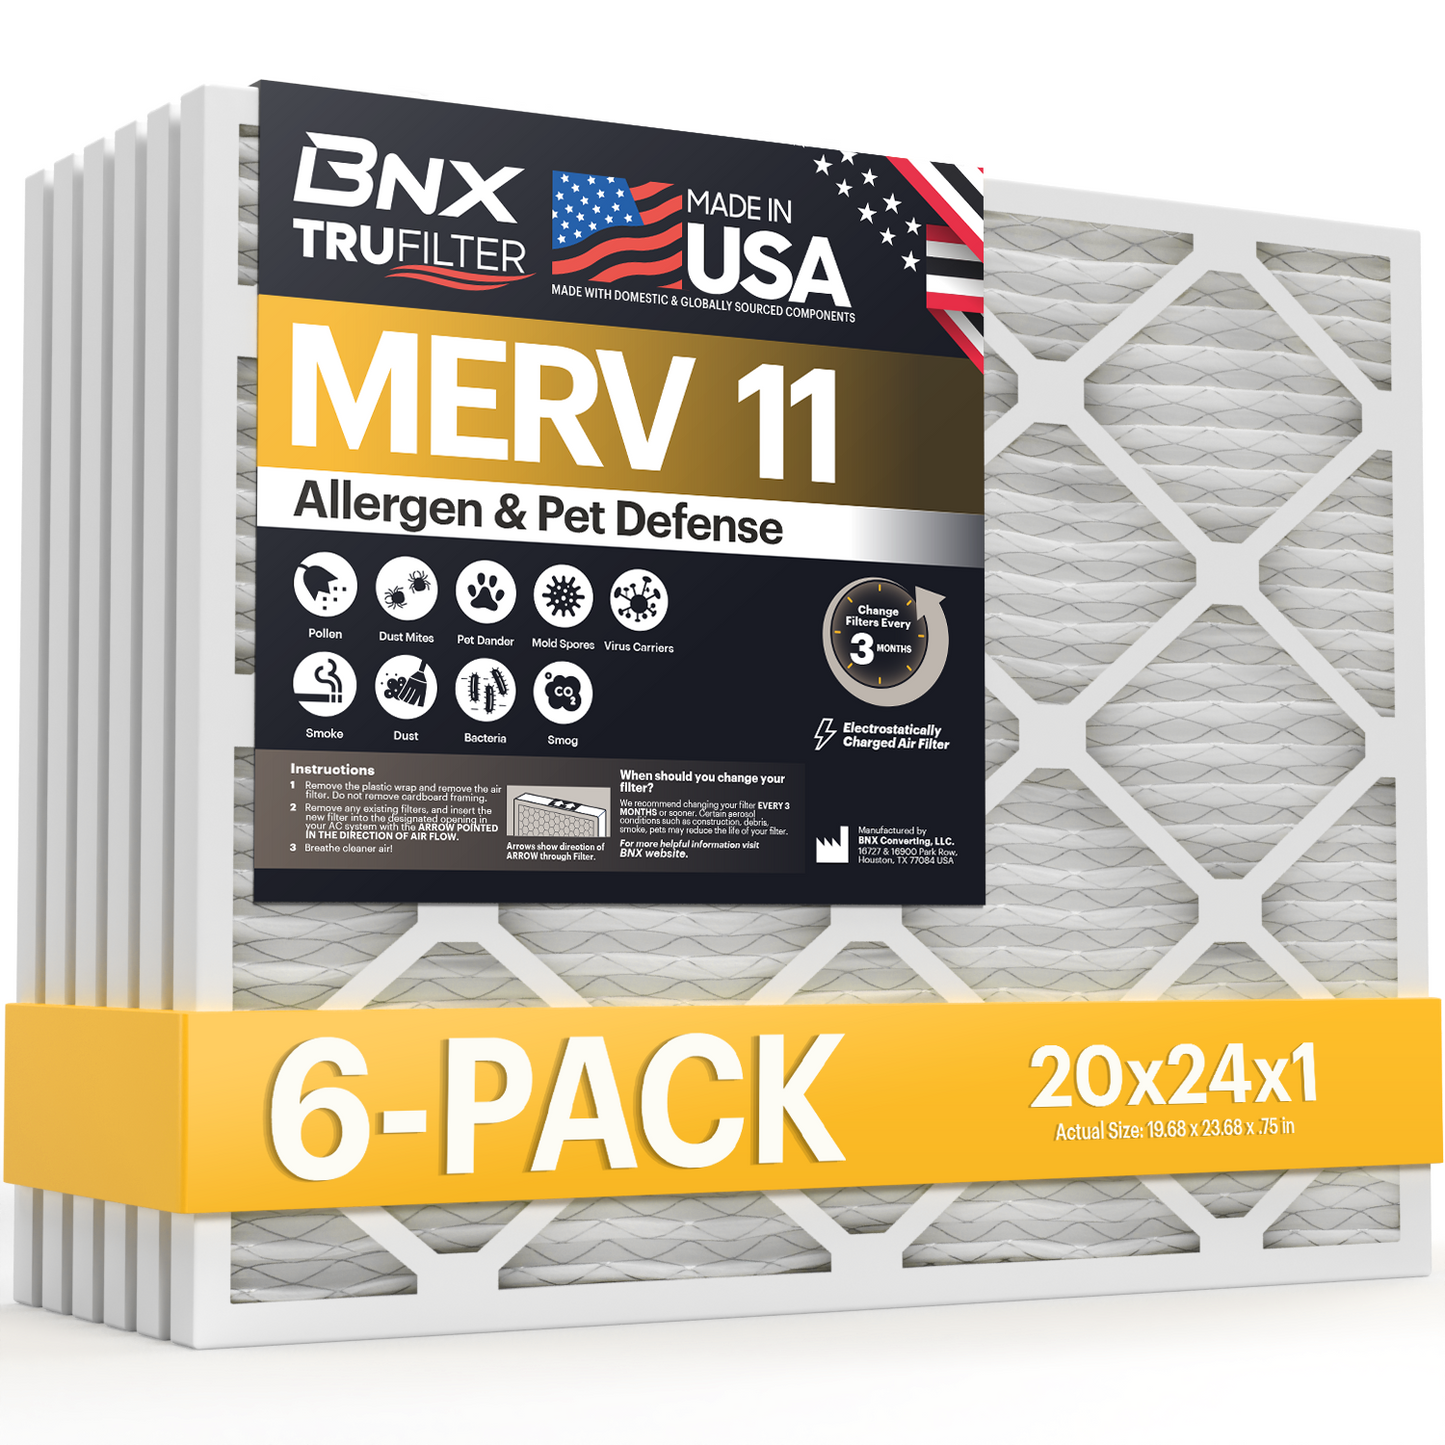 BNX TruFilter 20x24x1 Air Filter MERV 11 (6-Pack) - MADE IN USA - Allergen Defense Electrostatic Pleated Air Conditioner HVAC AC Furnace Filters for Allergies, Dust, Pet, Smoke, Allergy MPR 1200 FPR 7